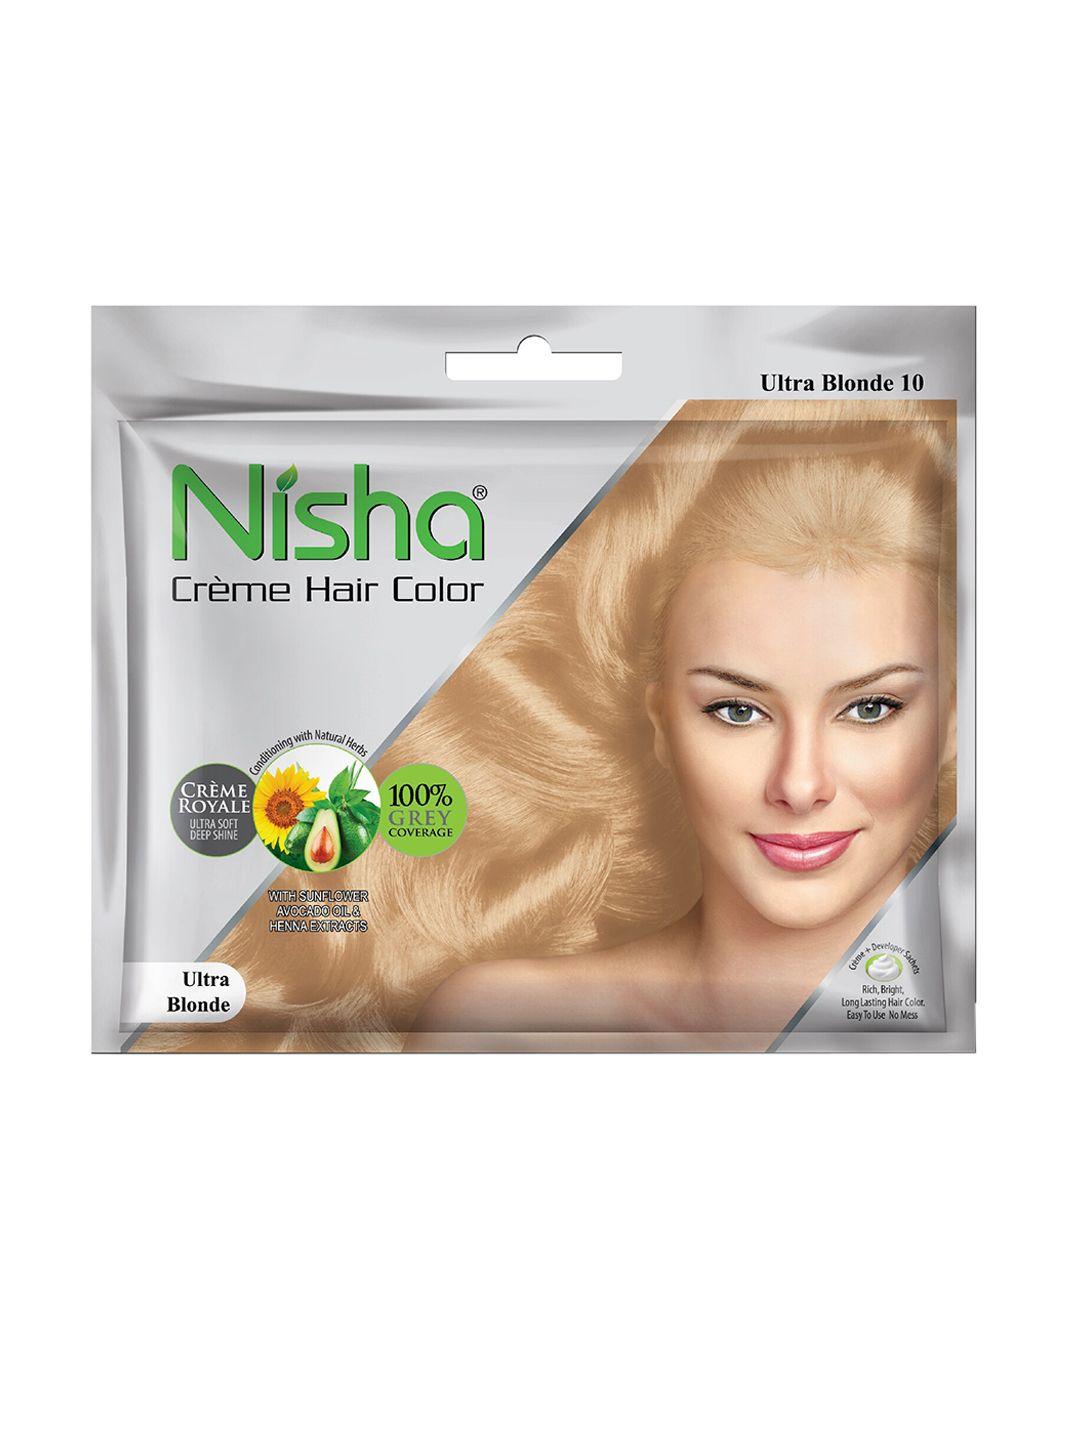 nisha unisex gold pack of 6 creme hair color 50gm each- ultra blonde